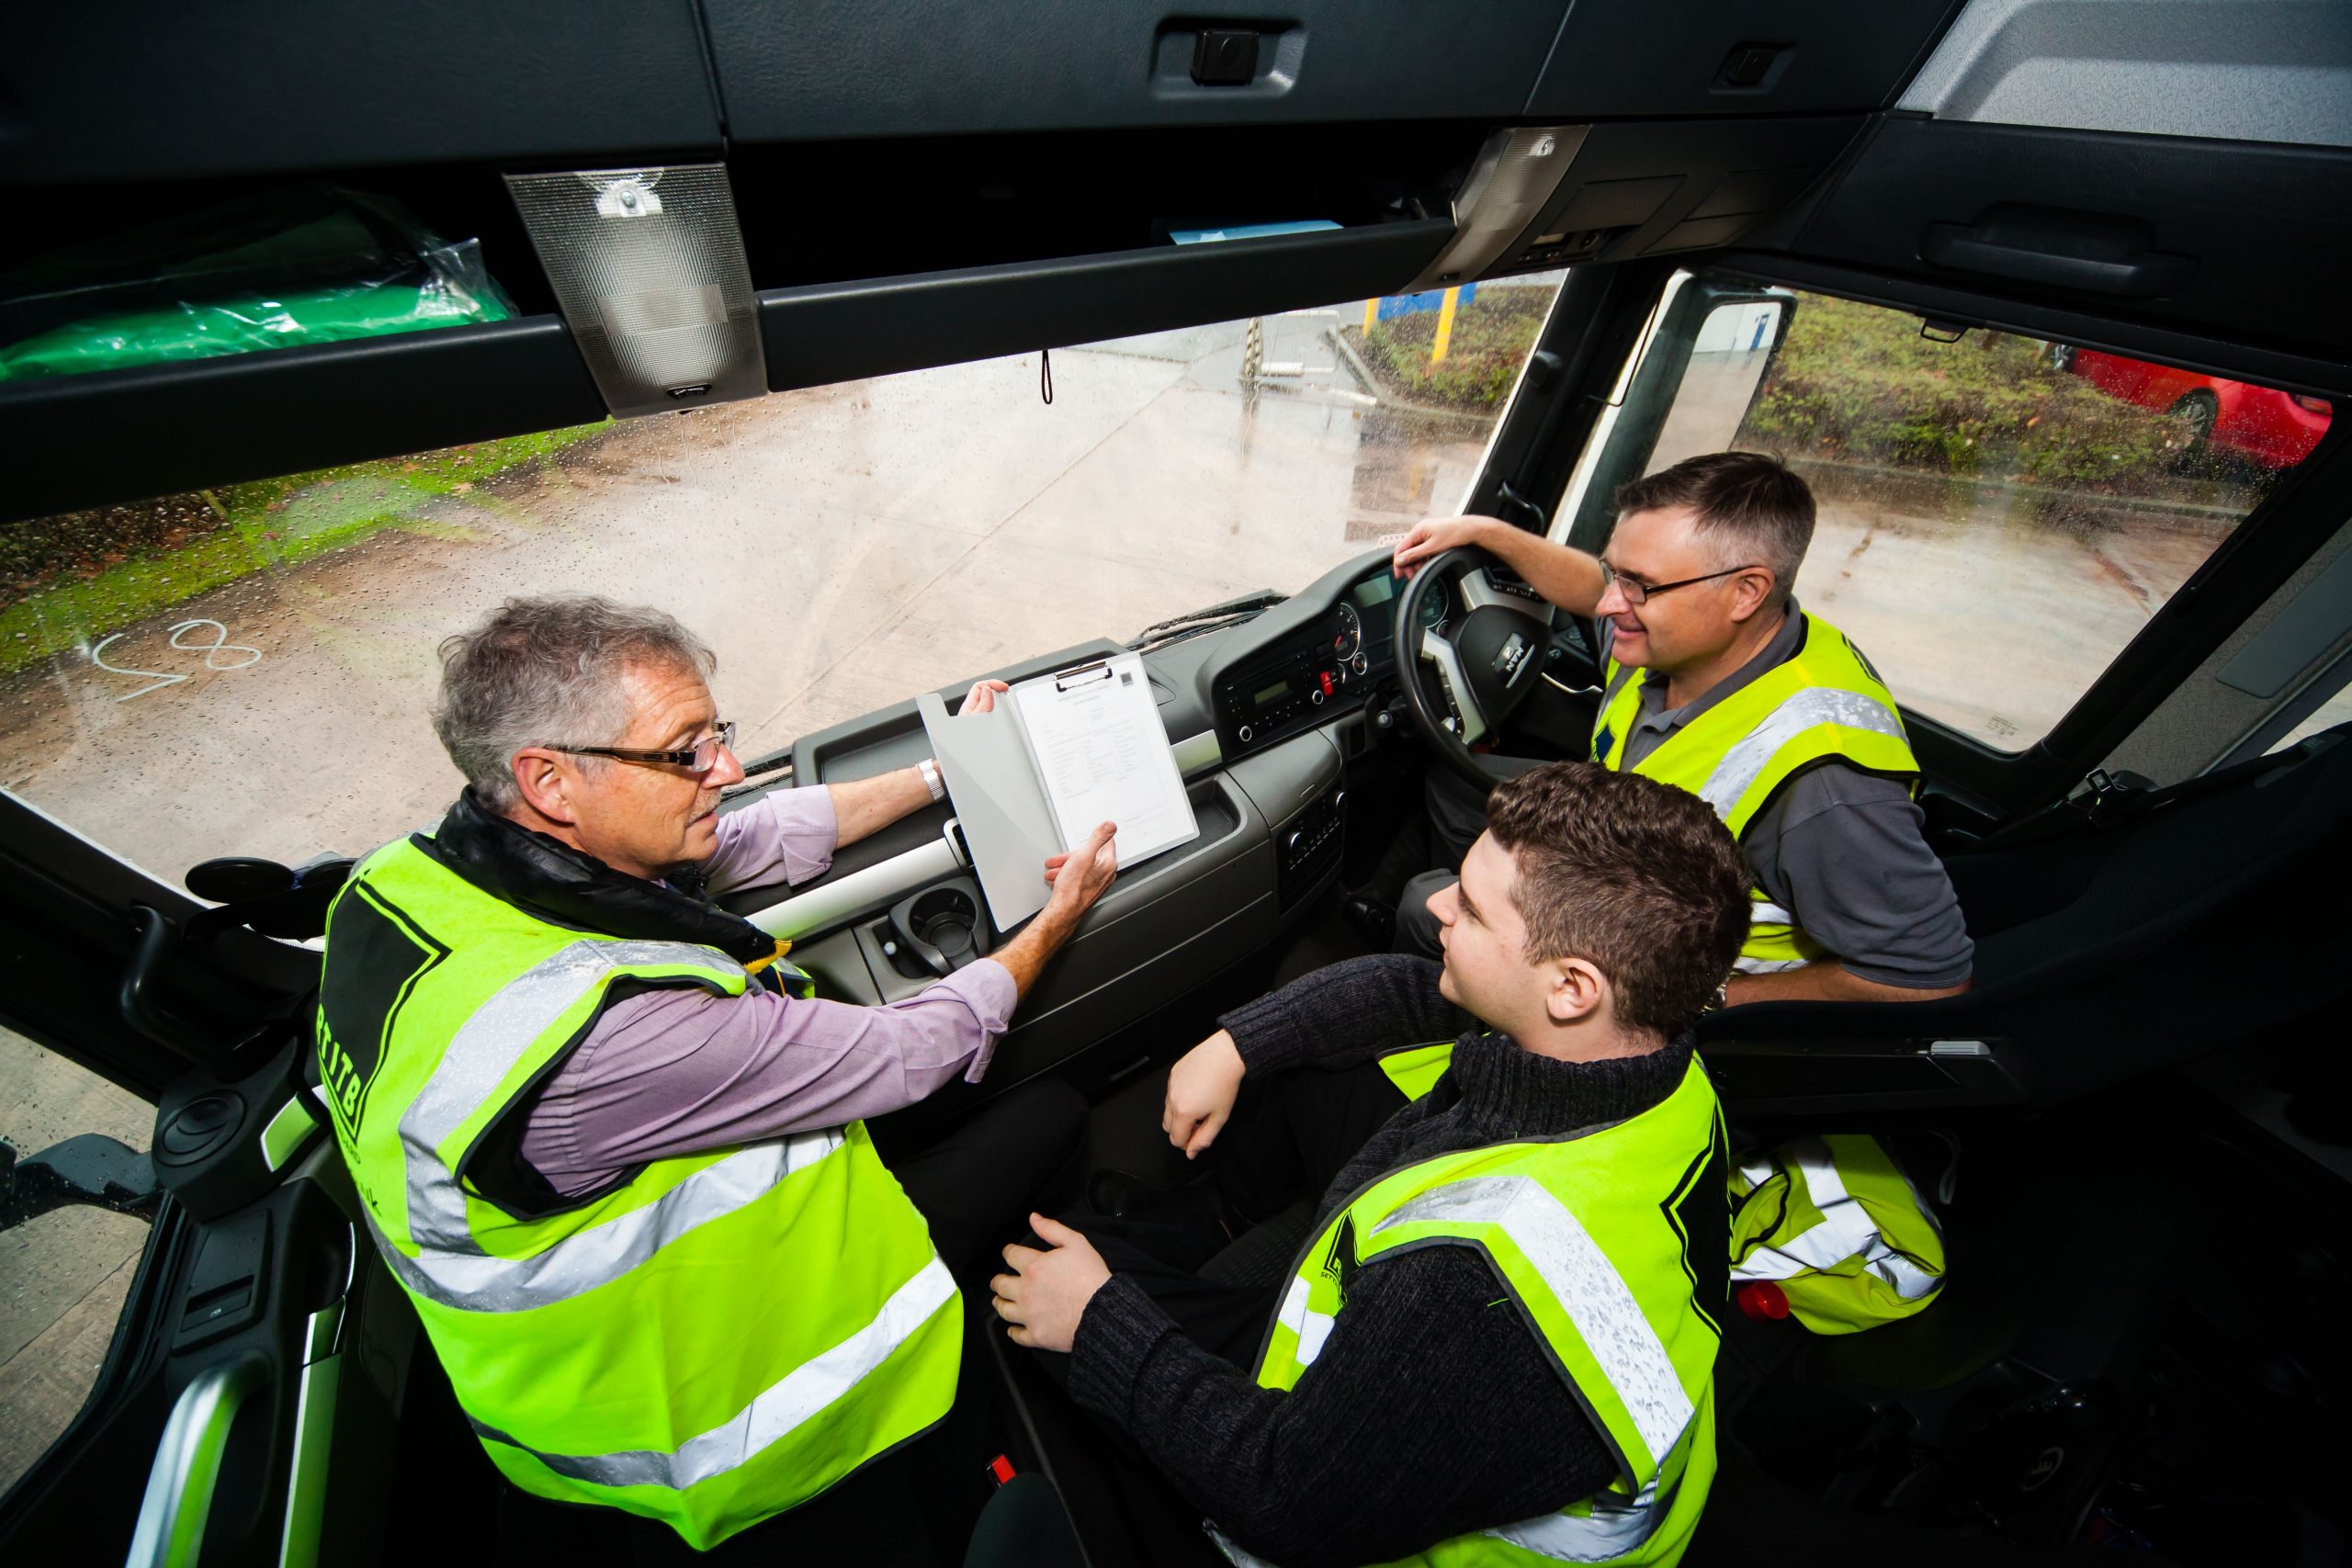 How telematics training can help reduce costs and increase safety